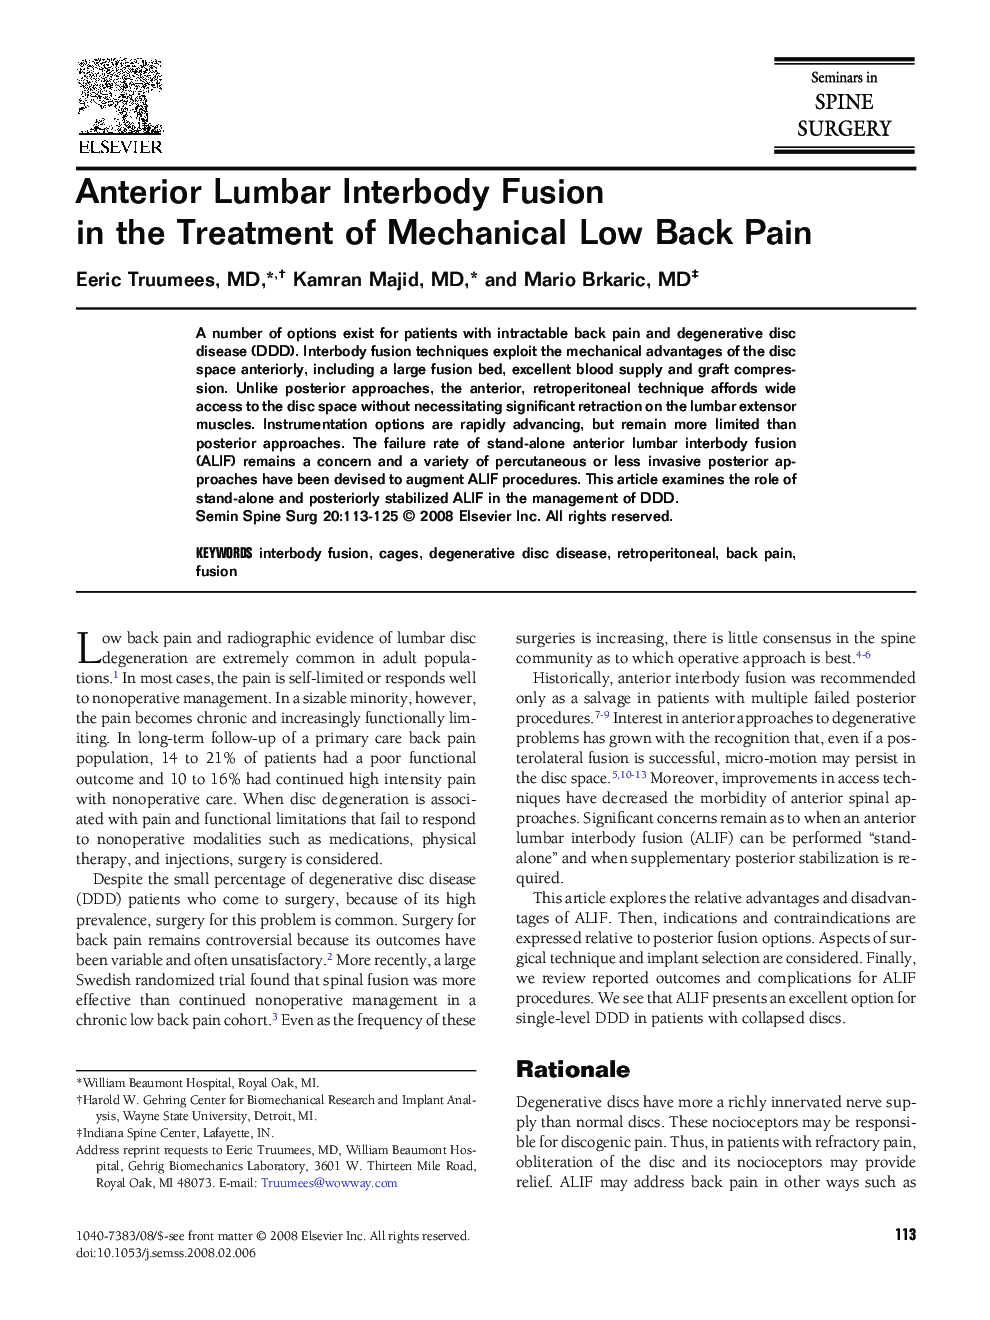 Anterior Lumbar Interbody Fusion in the Treatment of Mechanical Low Back Pain